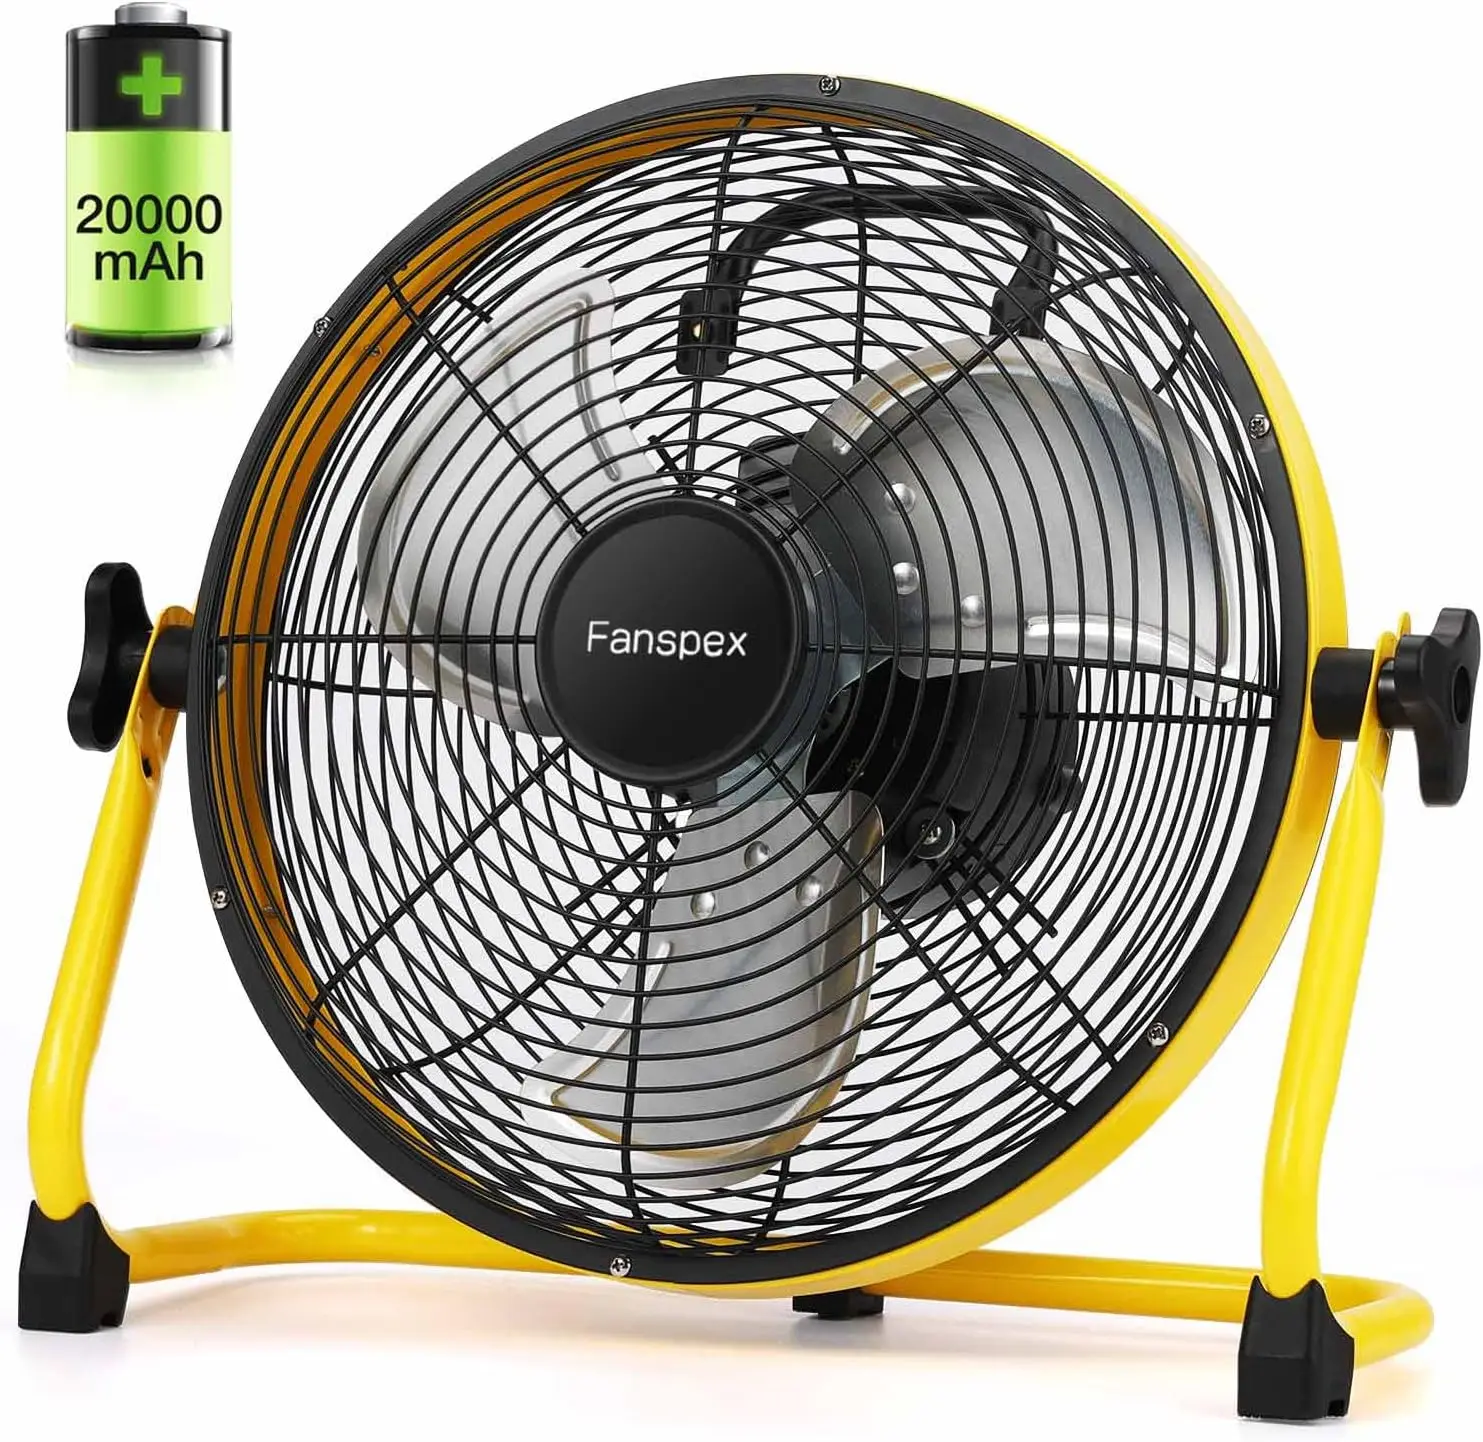 

Portable Battery Operated Fan, 20000 mAh Cordless Rechargeable Floor Camping Fan for Outdoor, DC 24V, 40dB Low Noise,6-32 Longer